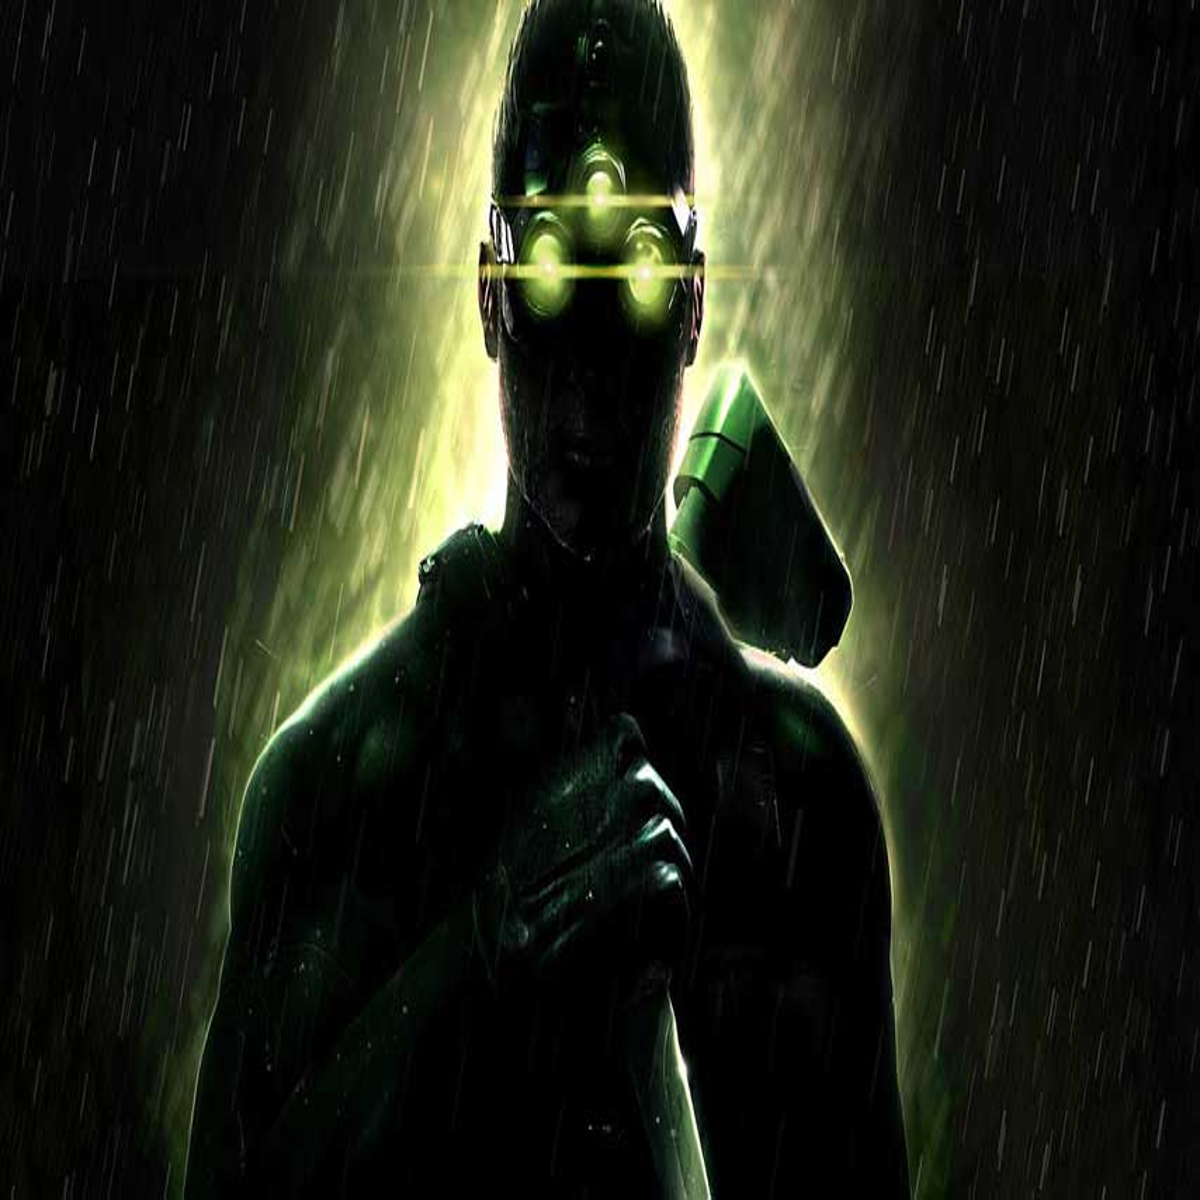  Tom Clancy's Splinter Cell Double Agent - Xbox 360 : Artist Not  Provided: Video Games